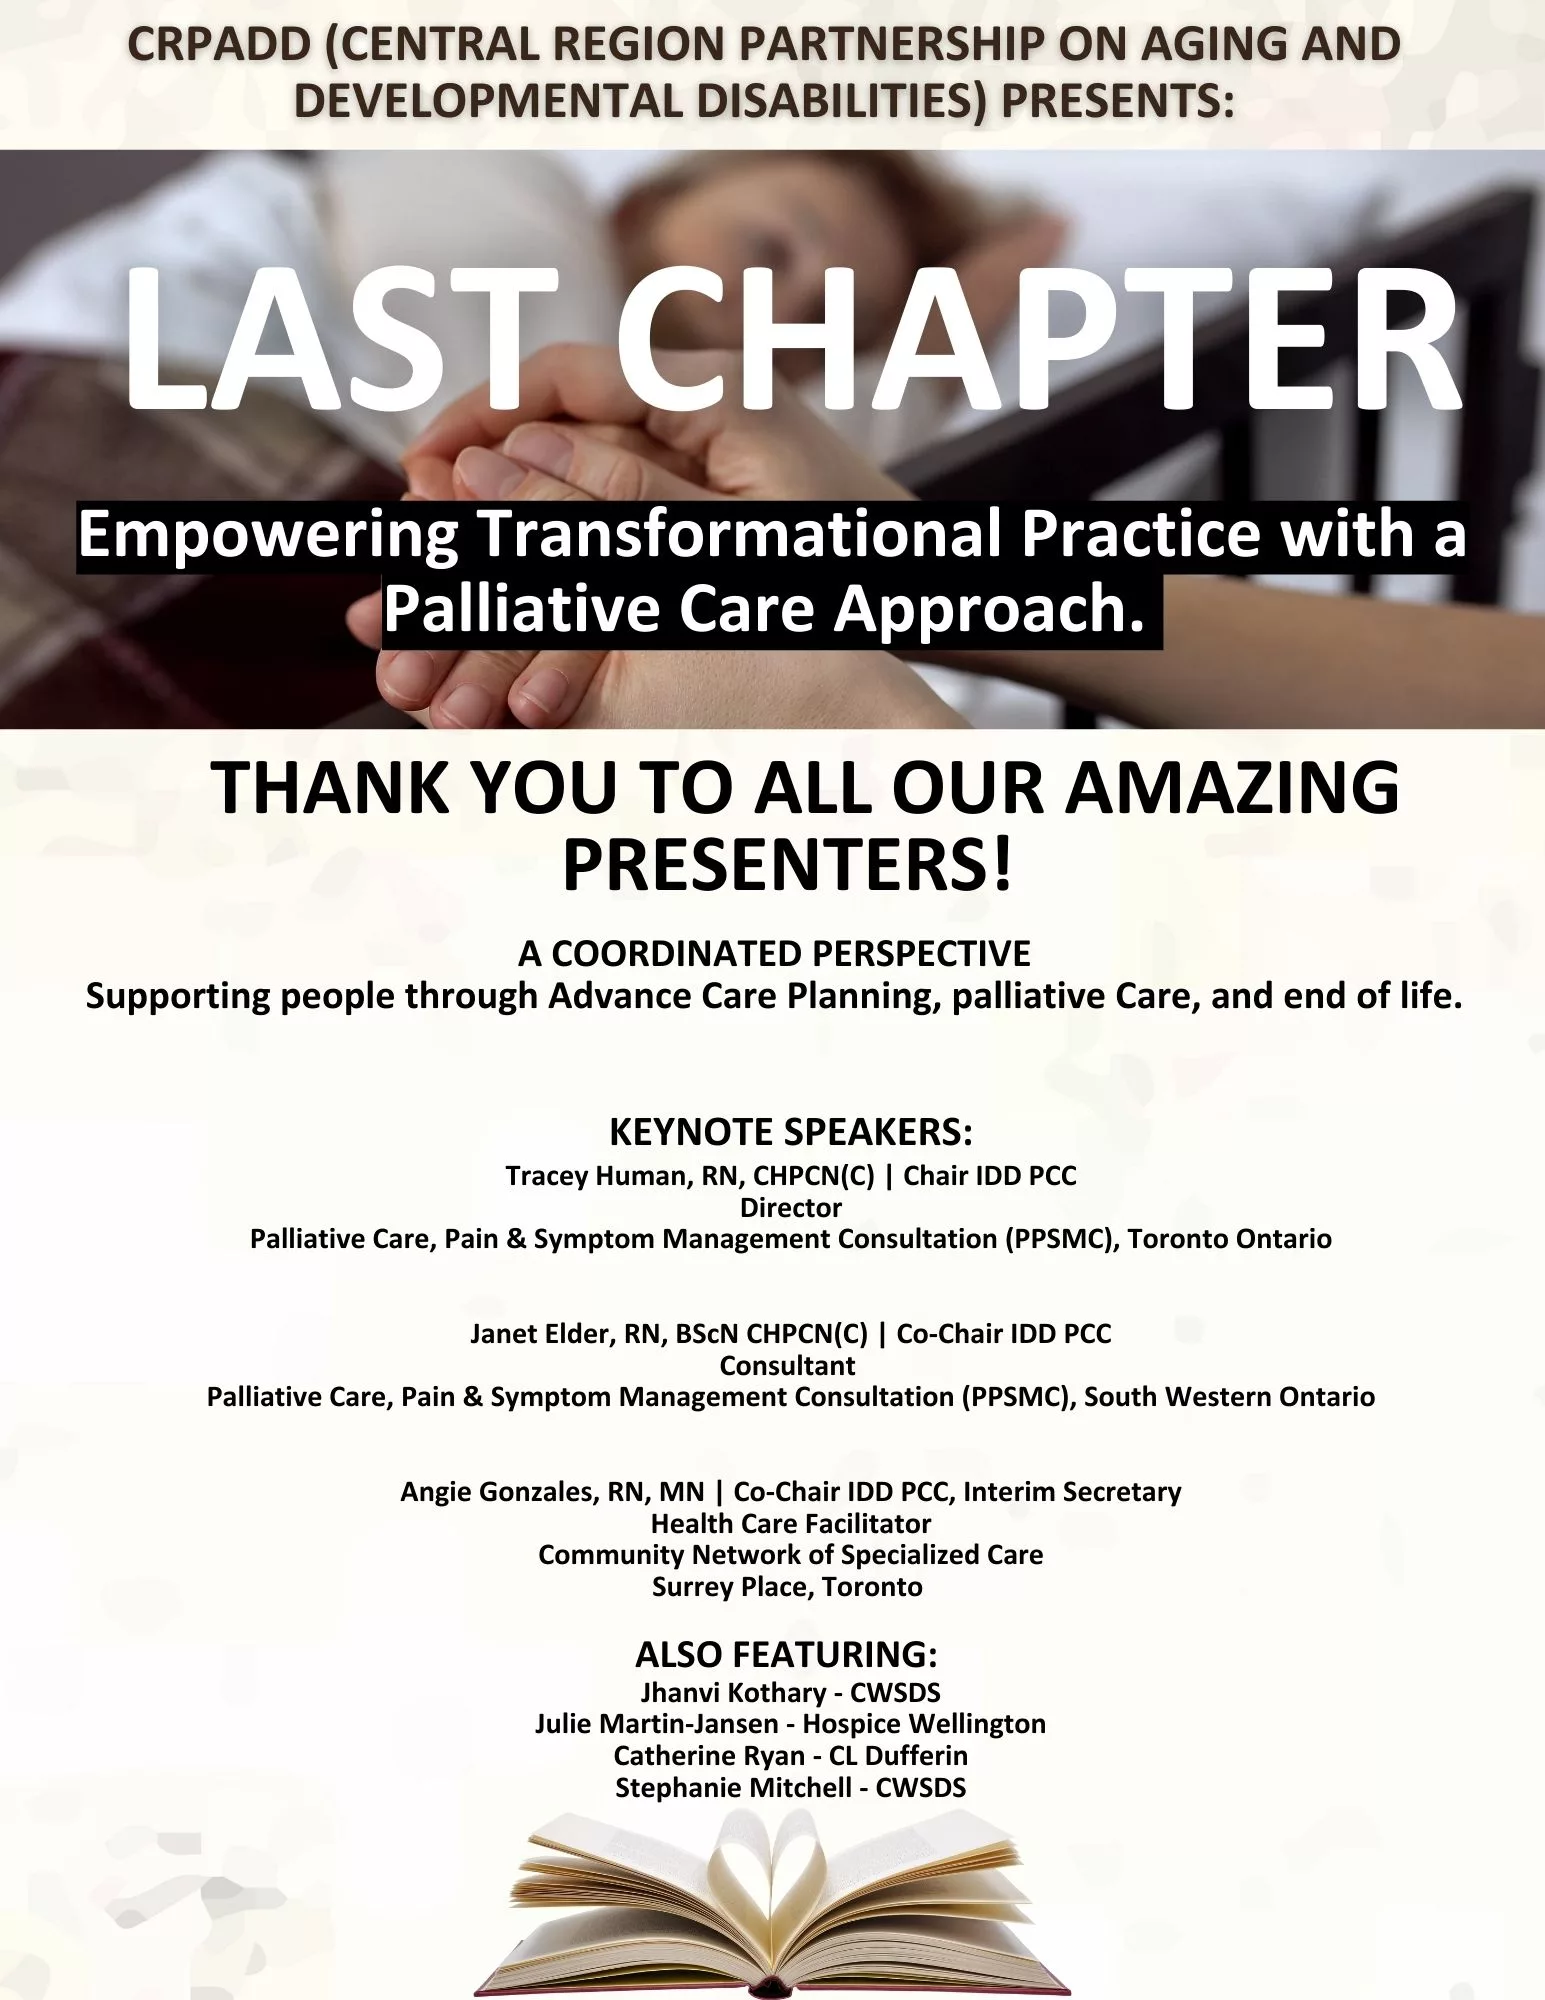 Last Chapter Presentation thank you list of all presenters